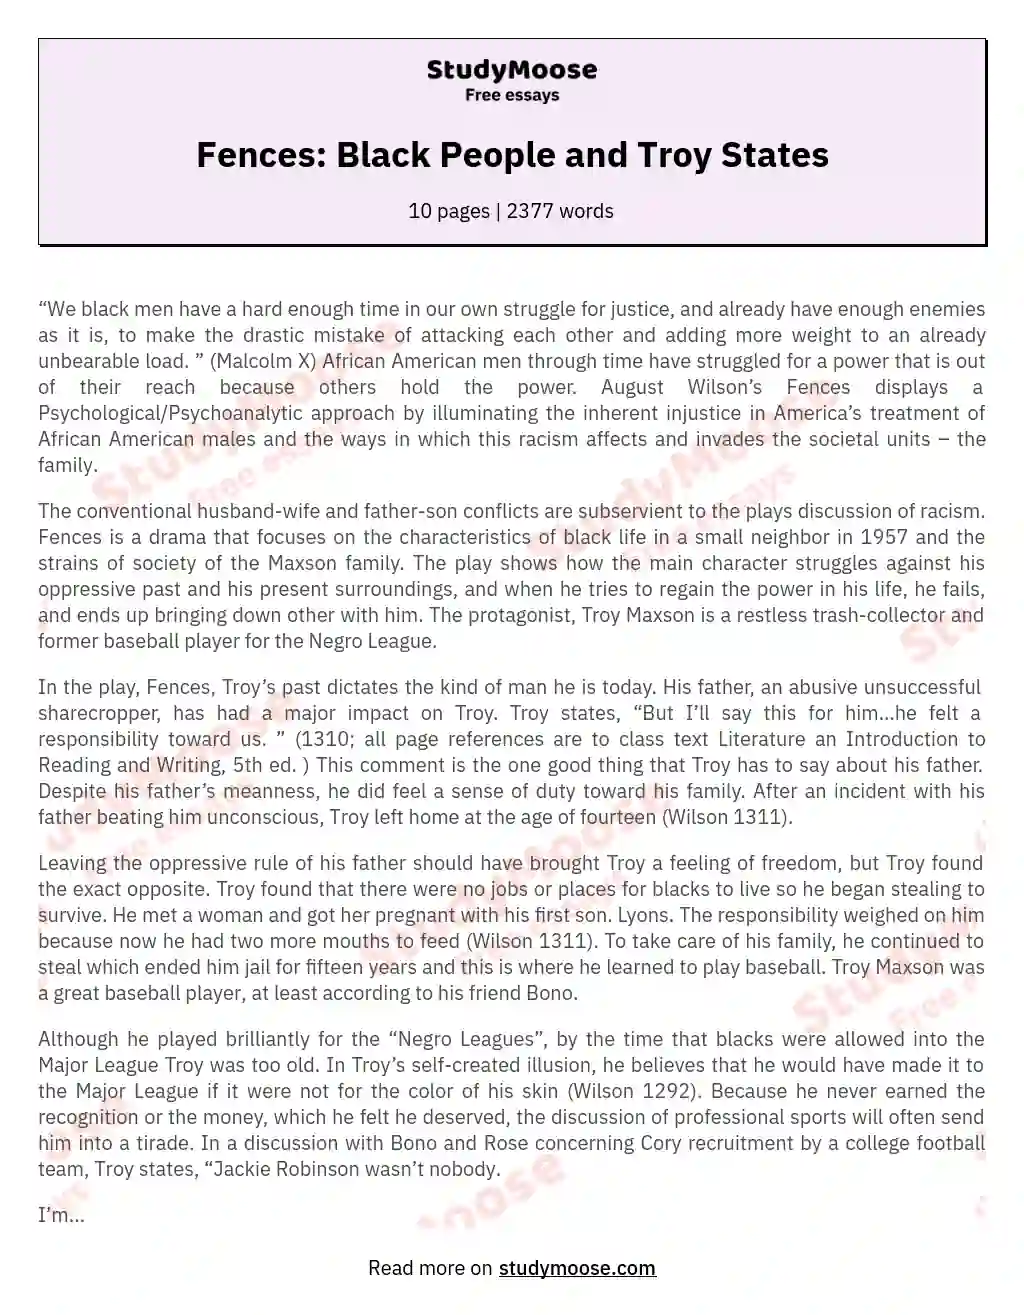 Fences: Black People and Troy States